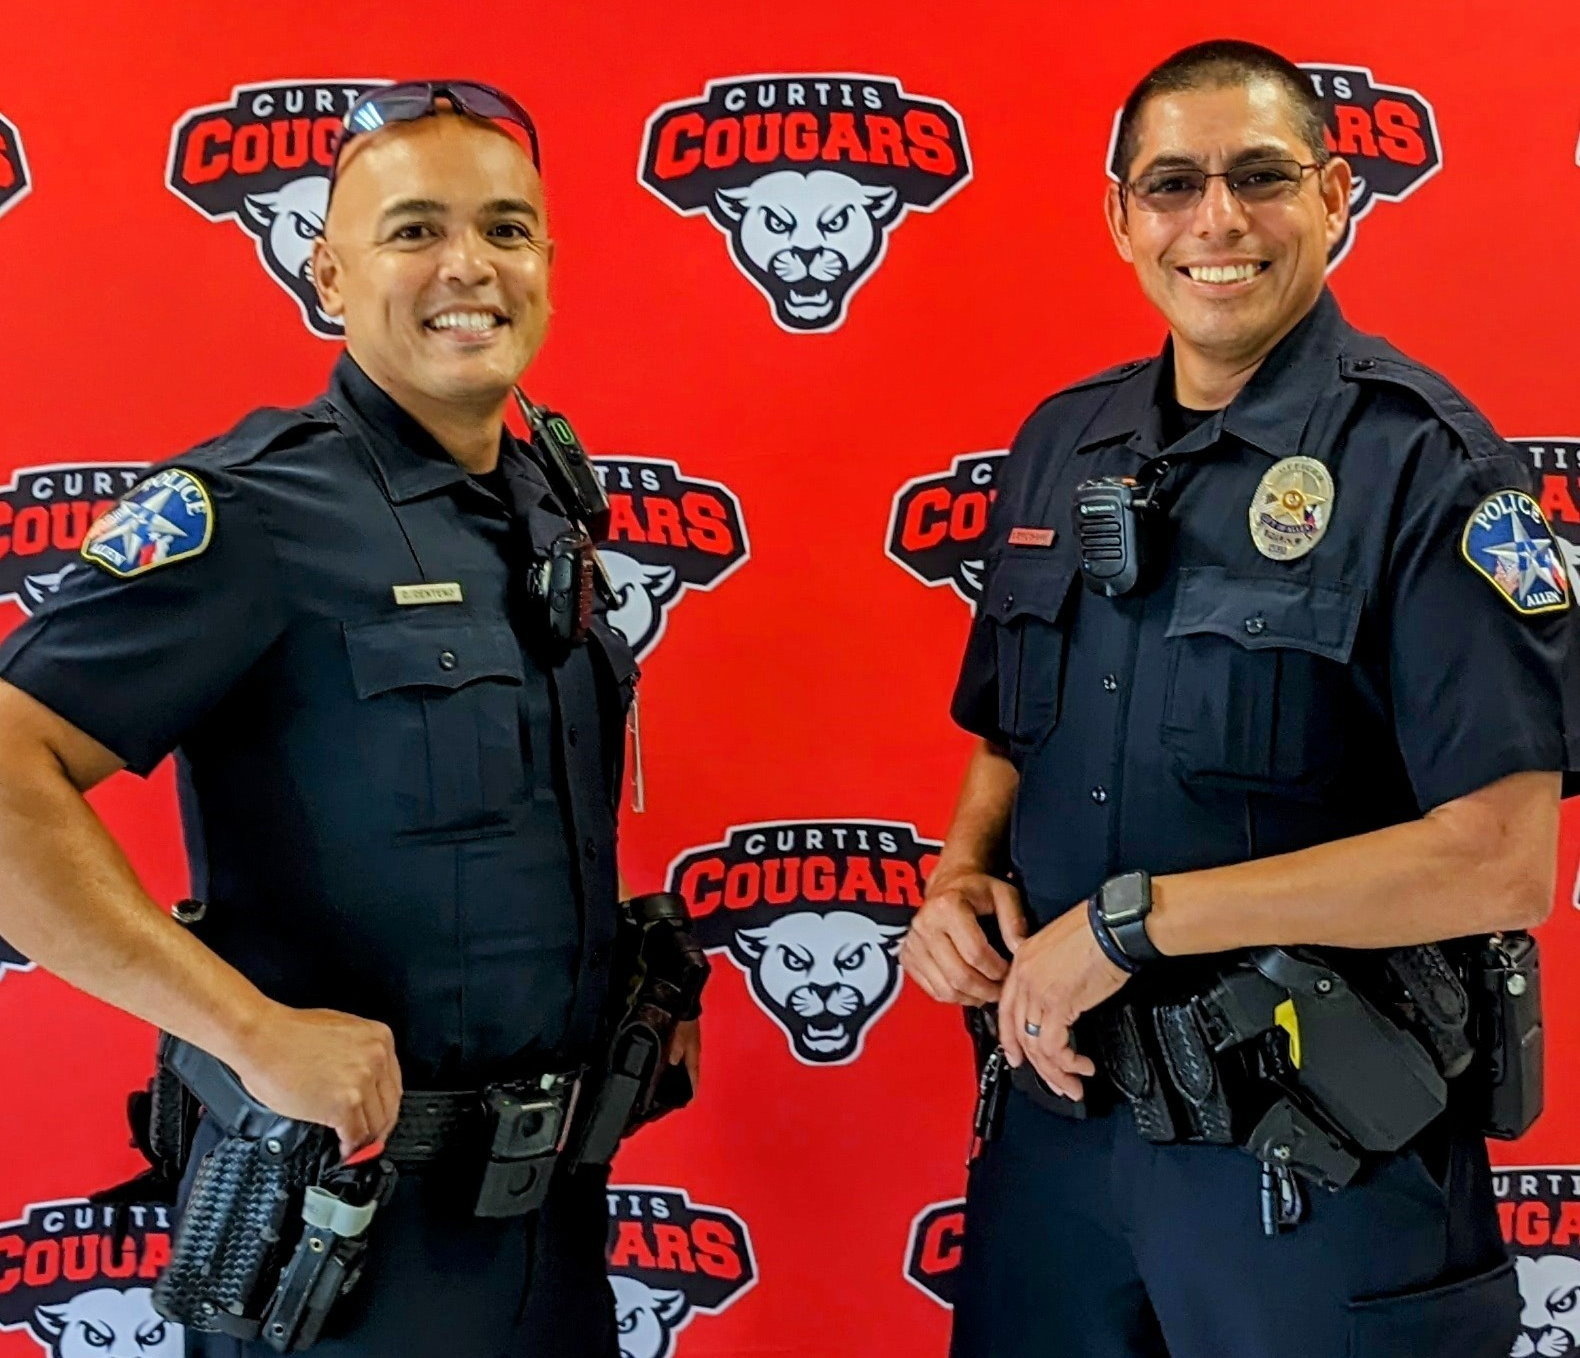 Curtis Student Resource Officer Teams